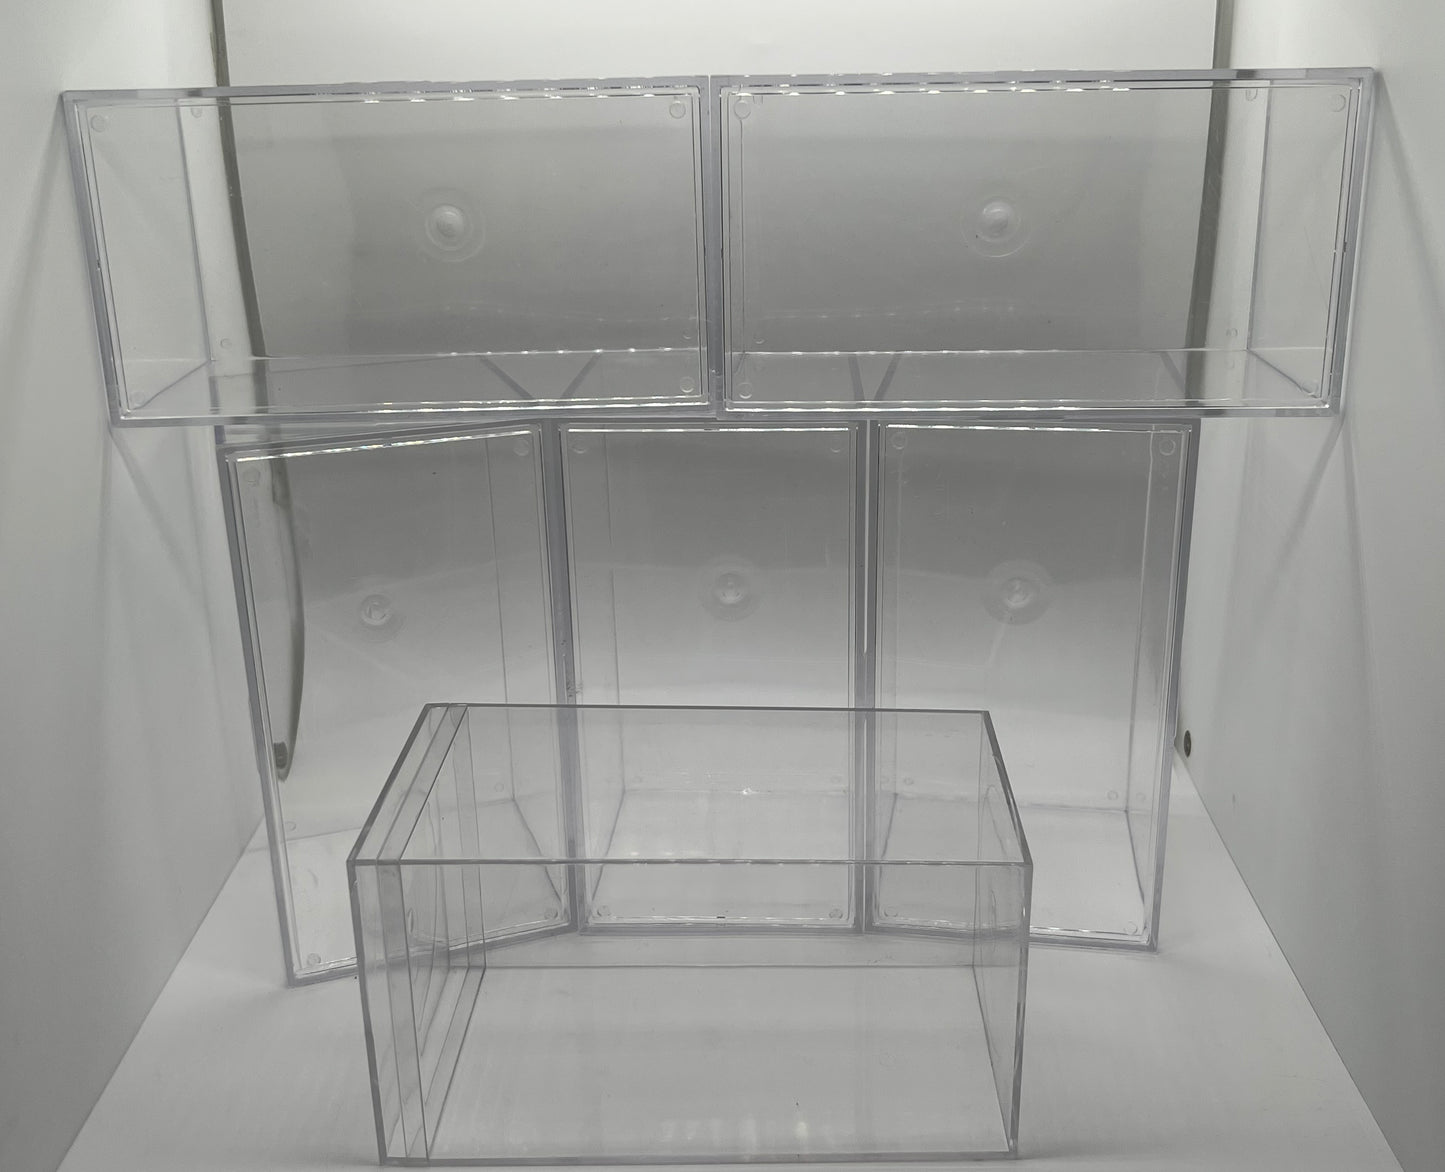 Six 8x4x4 Acrylic/Plastic Action Figure Beanie Baby Display Case Boxes